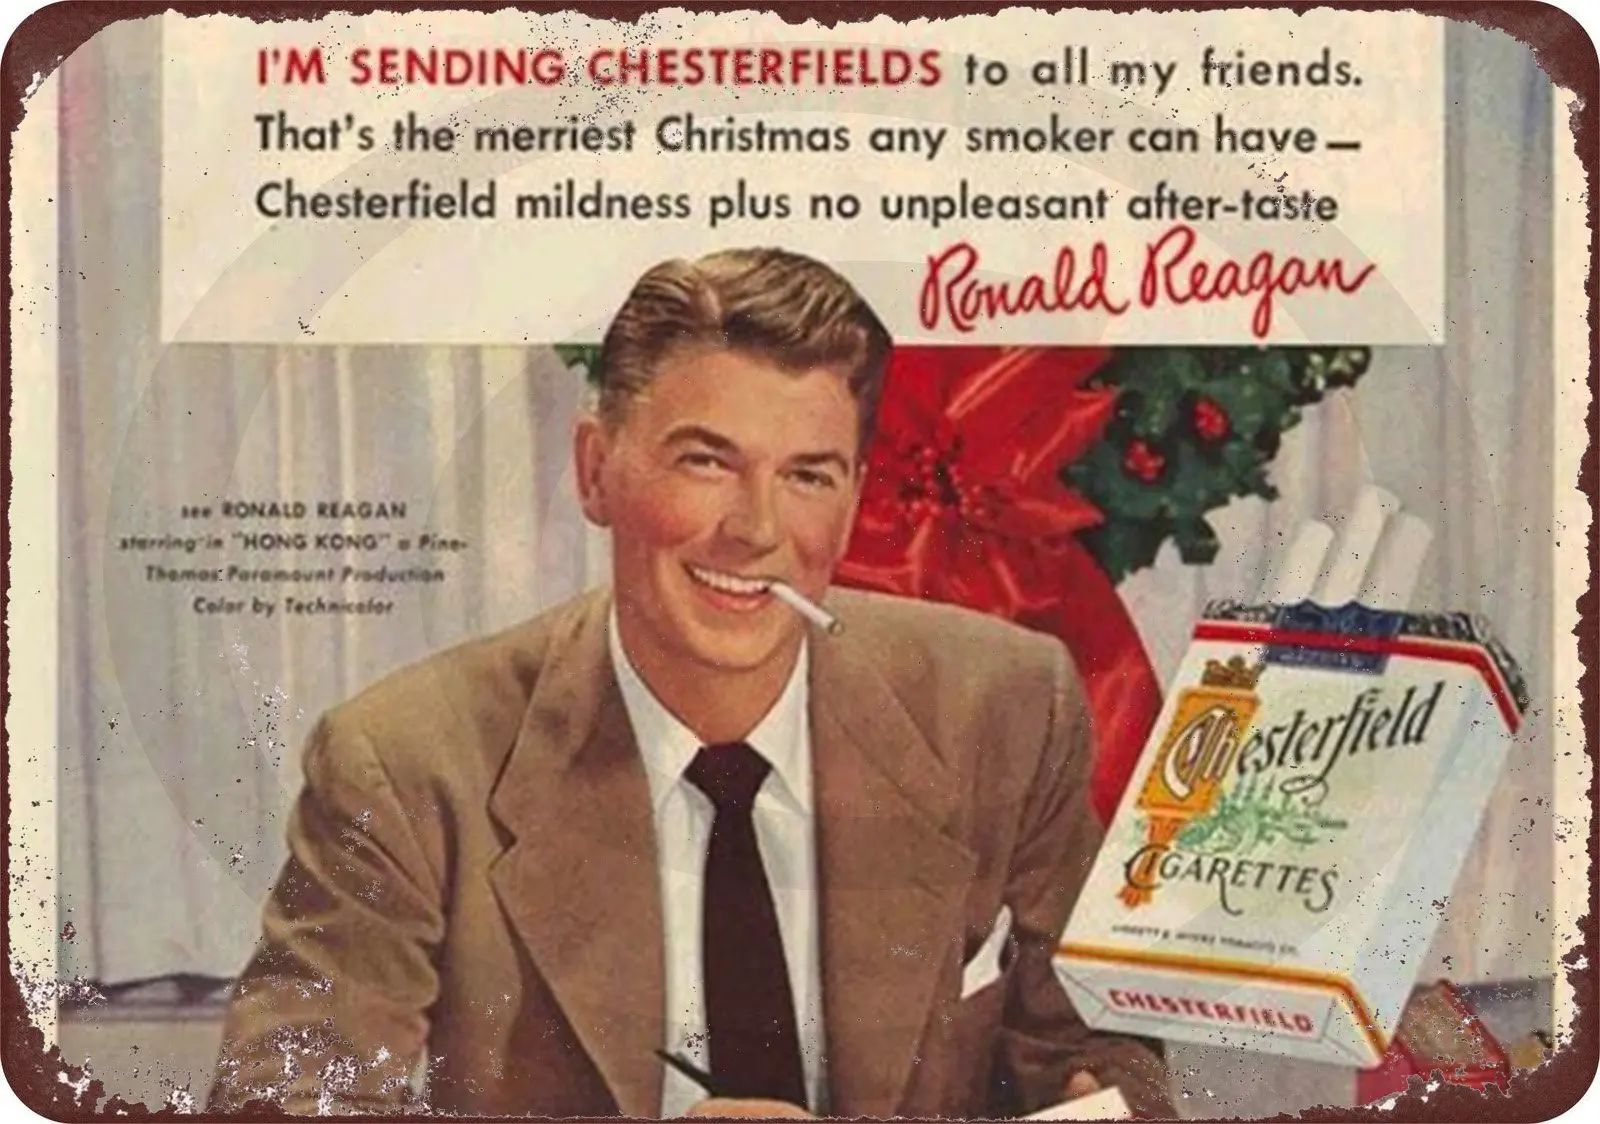 

Custom Kraze Ronald Reagan Chesterfield Cigarettes Reproduction Metal Sign 8 x 12 Made in The USA